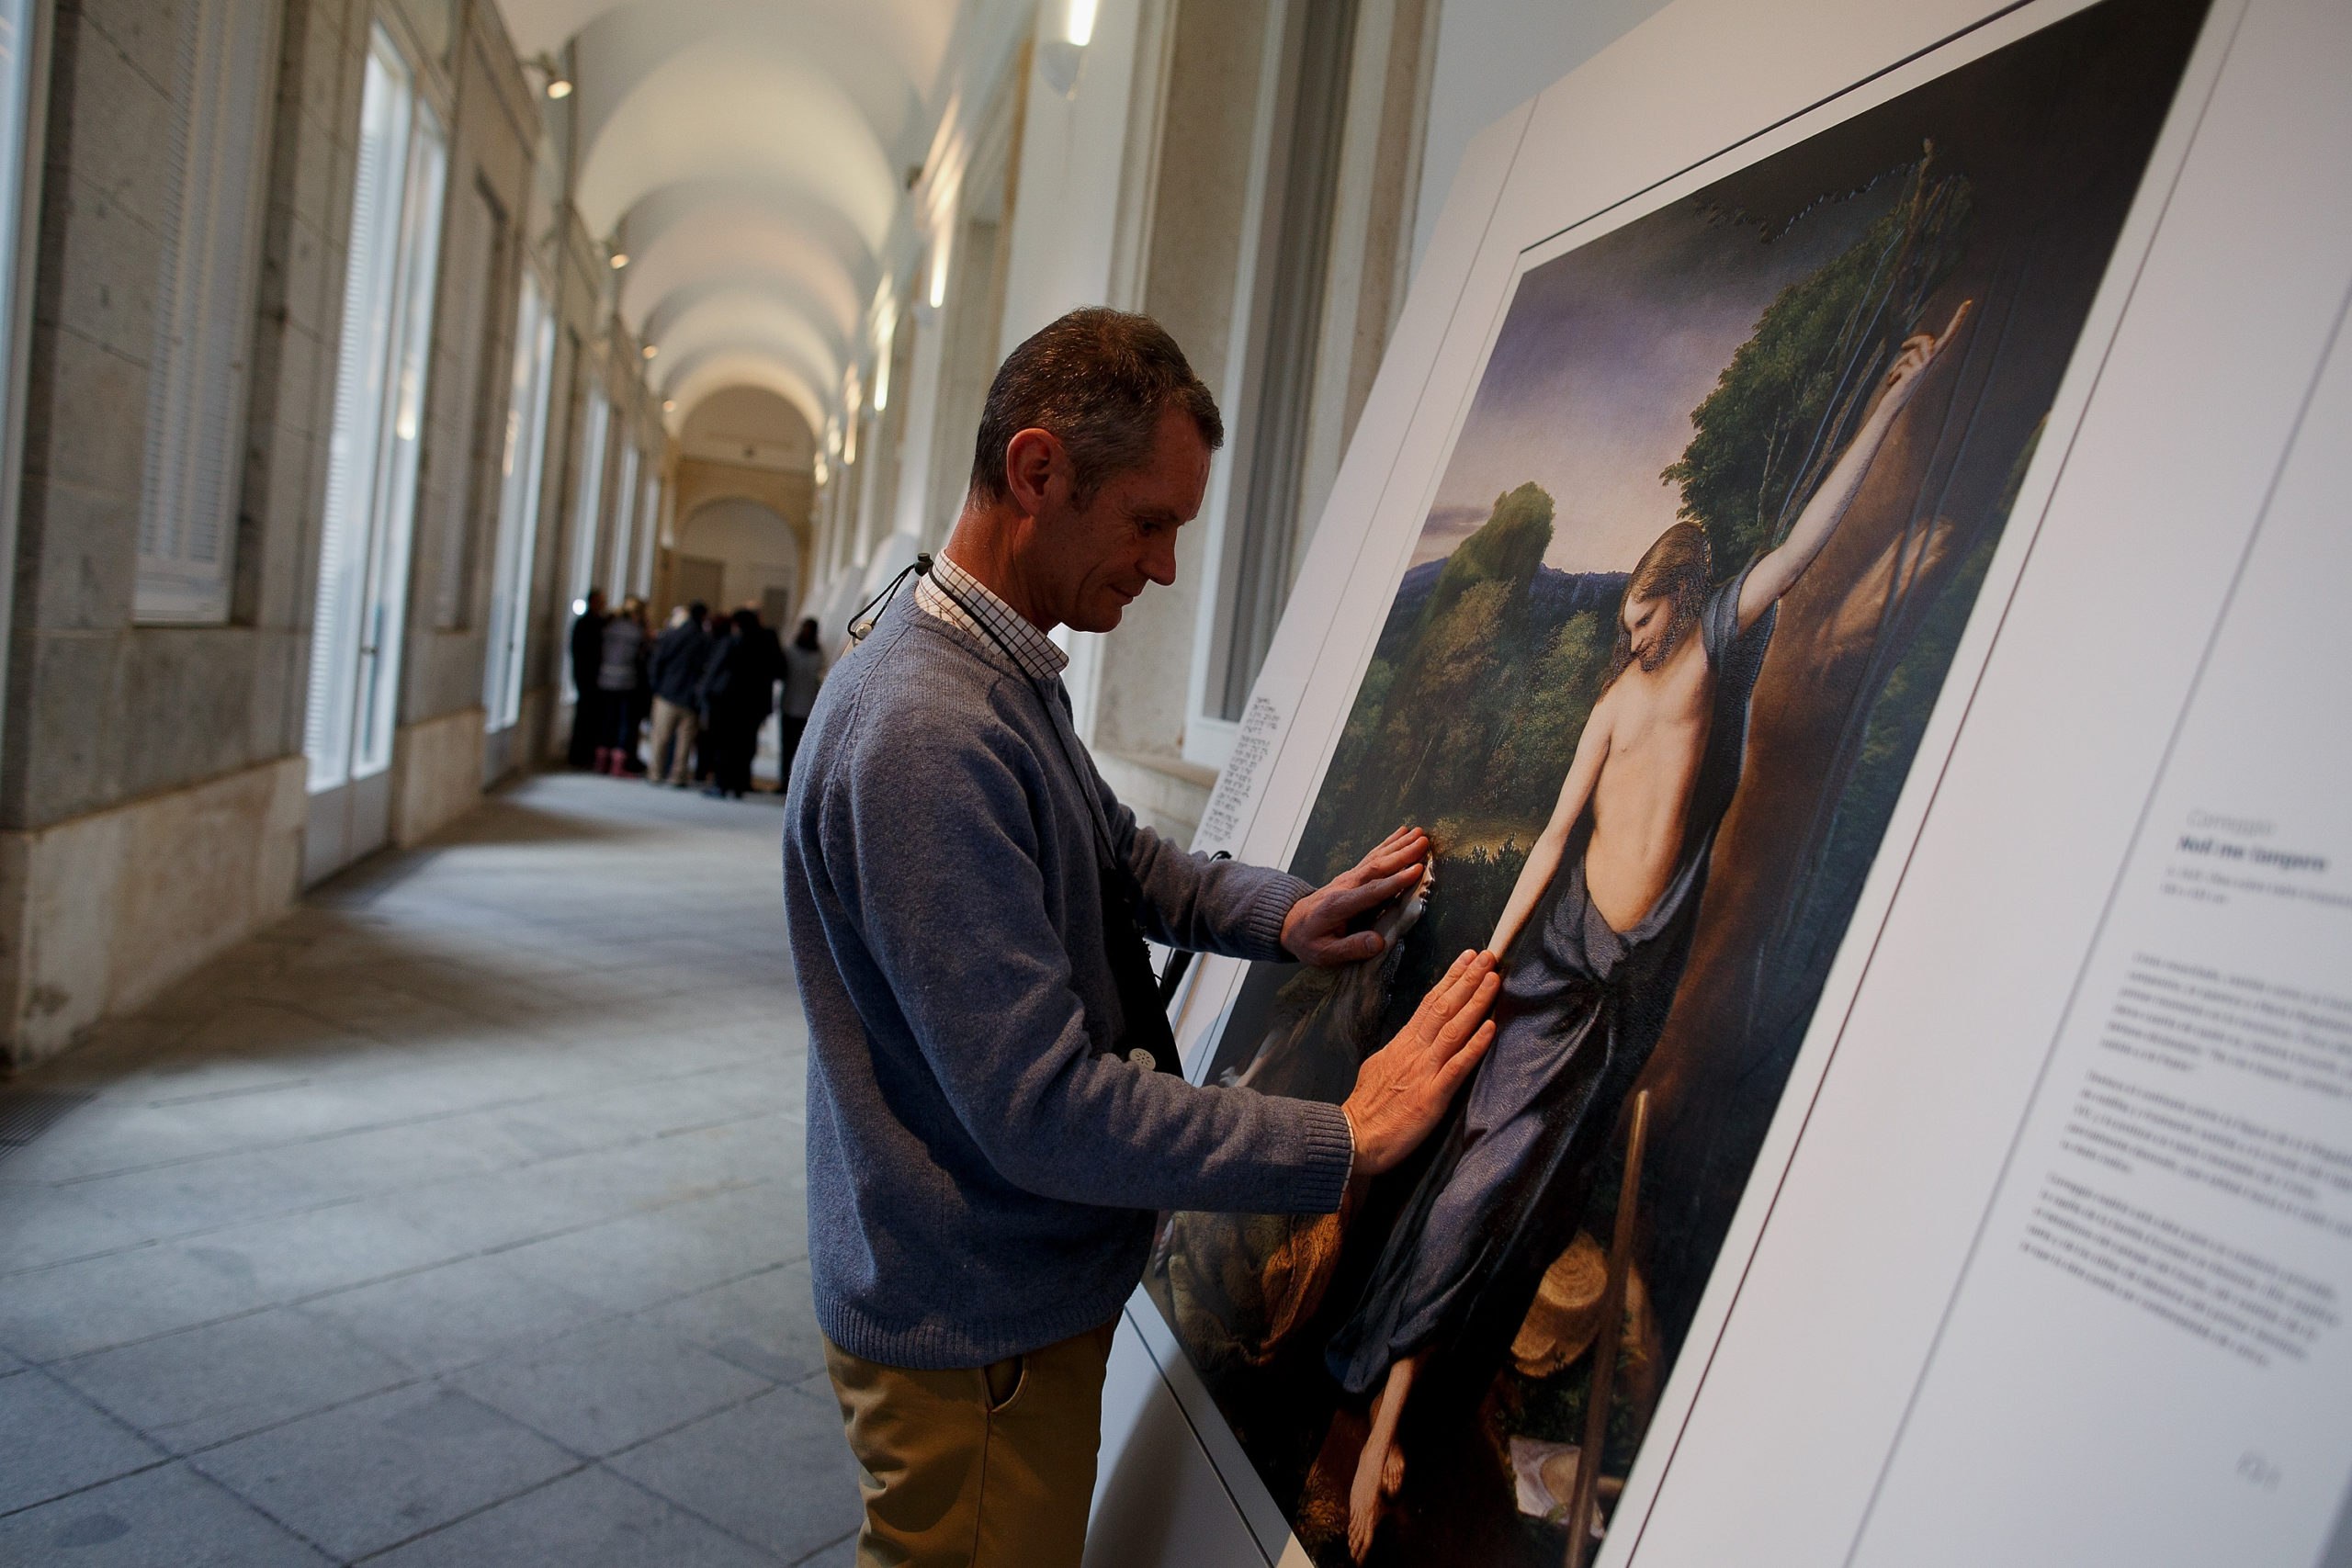 New Printing Tech Allows The Blind To Touch Priceless Paintings